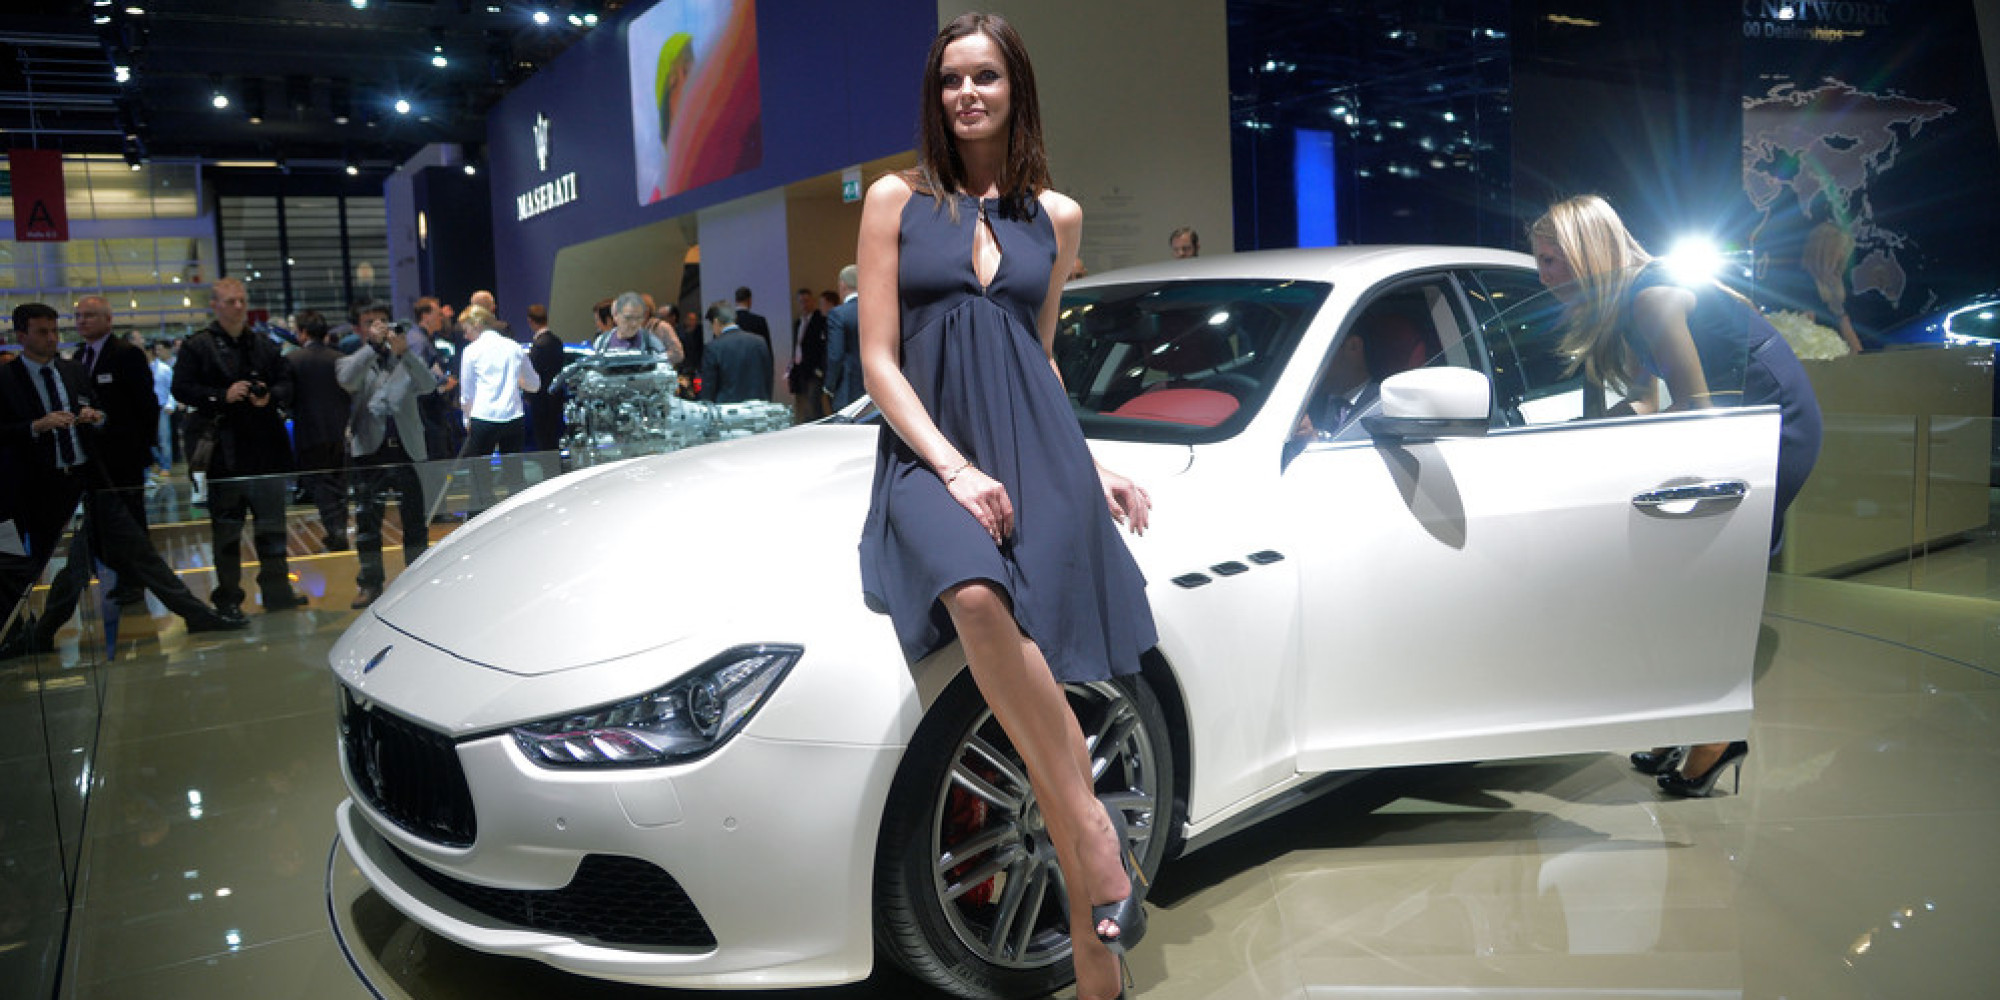 Here Are The Answers To The Questions Everyone's Asking About The Maserati Ghibli ...2000 x 1000